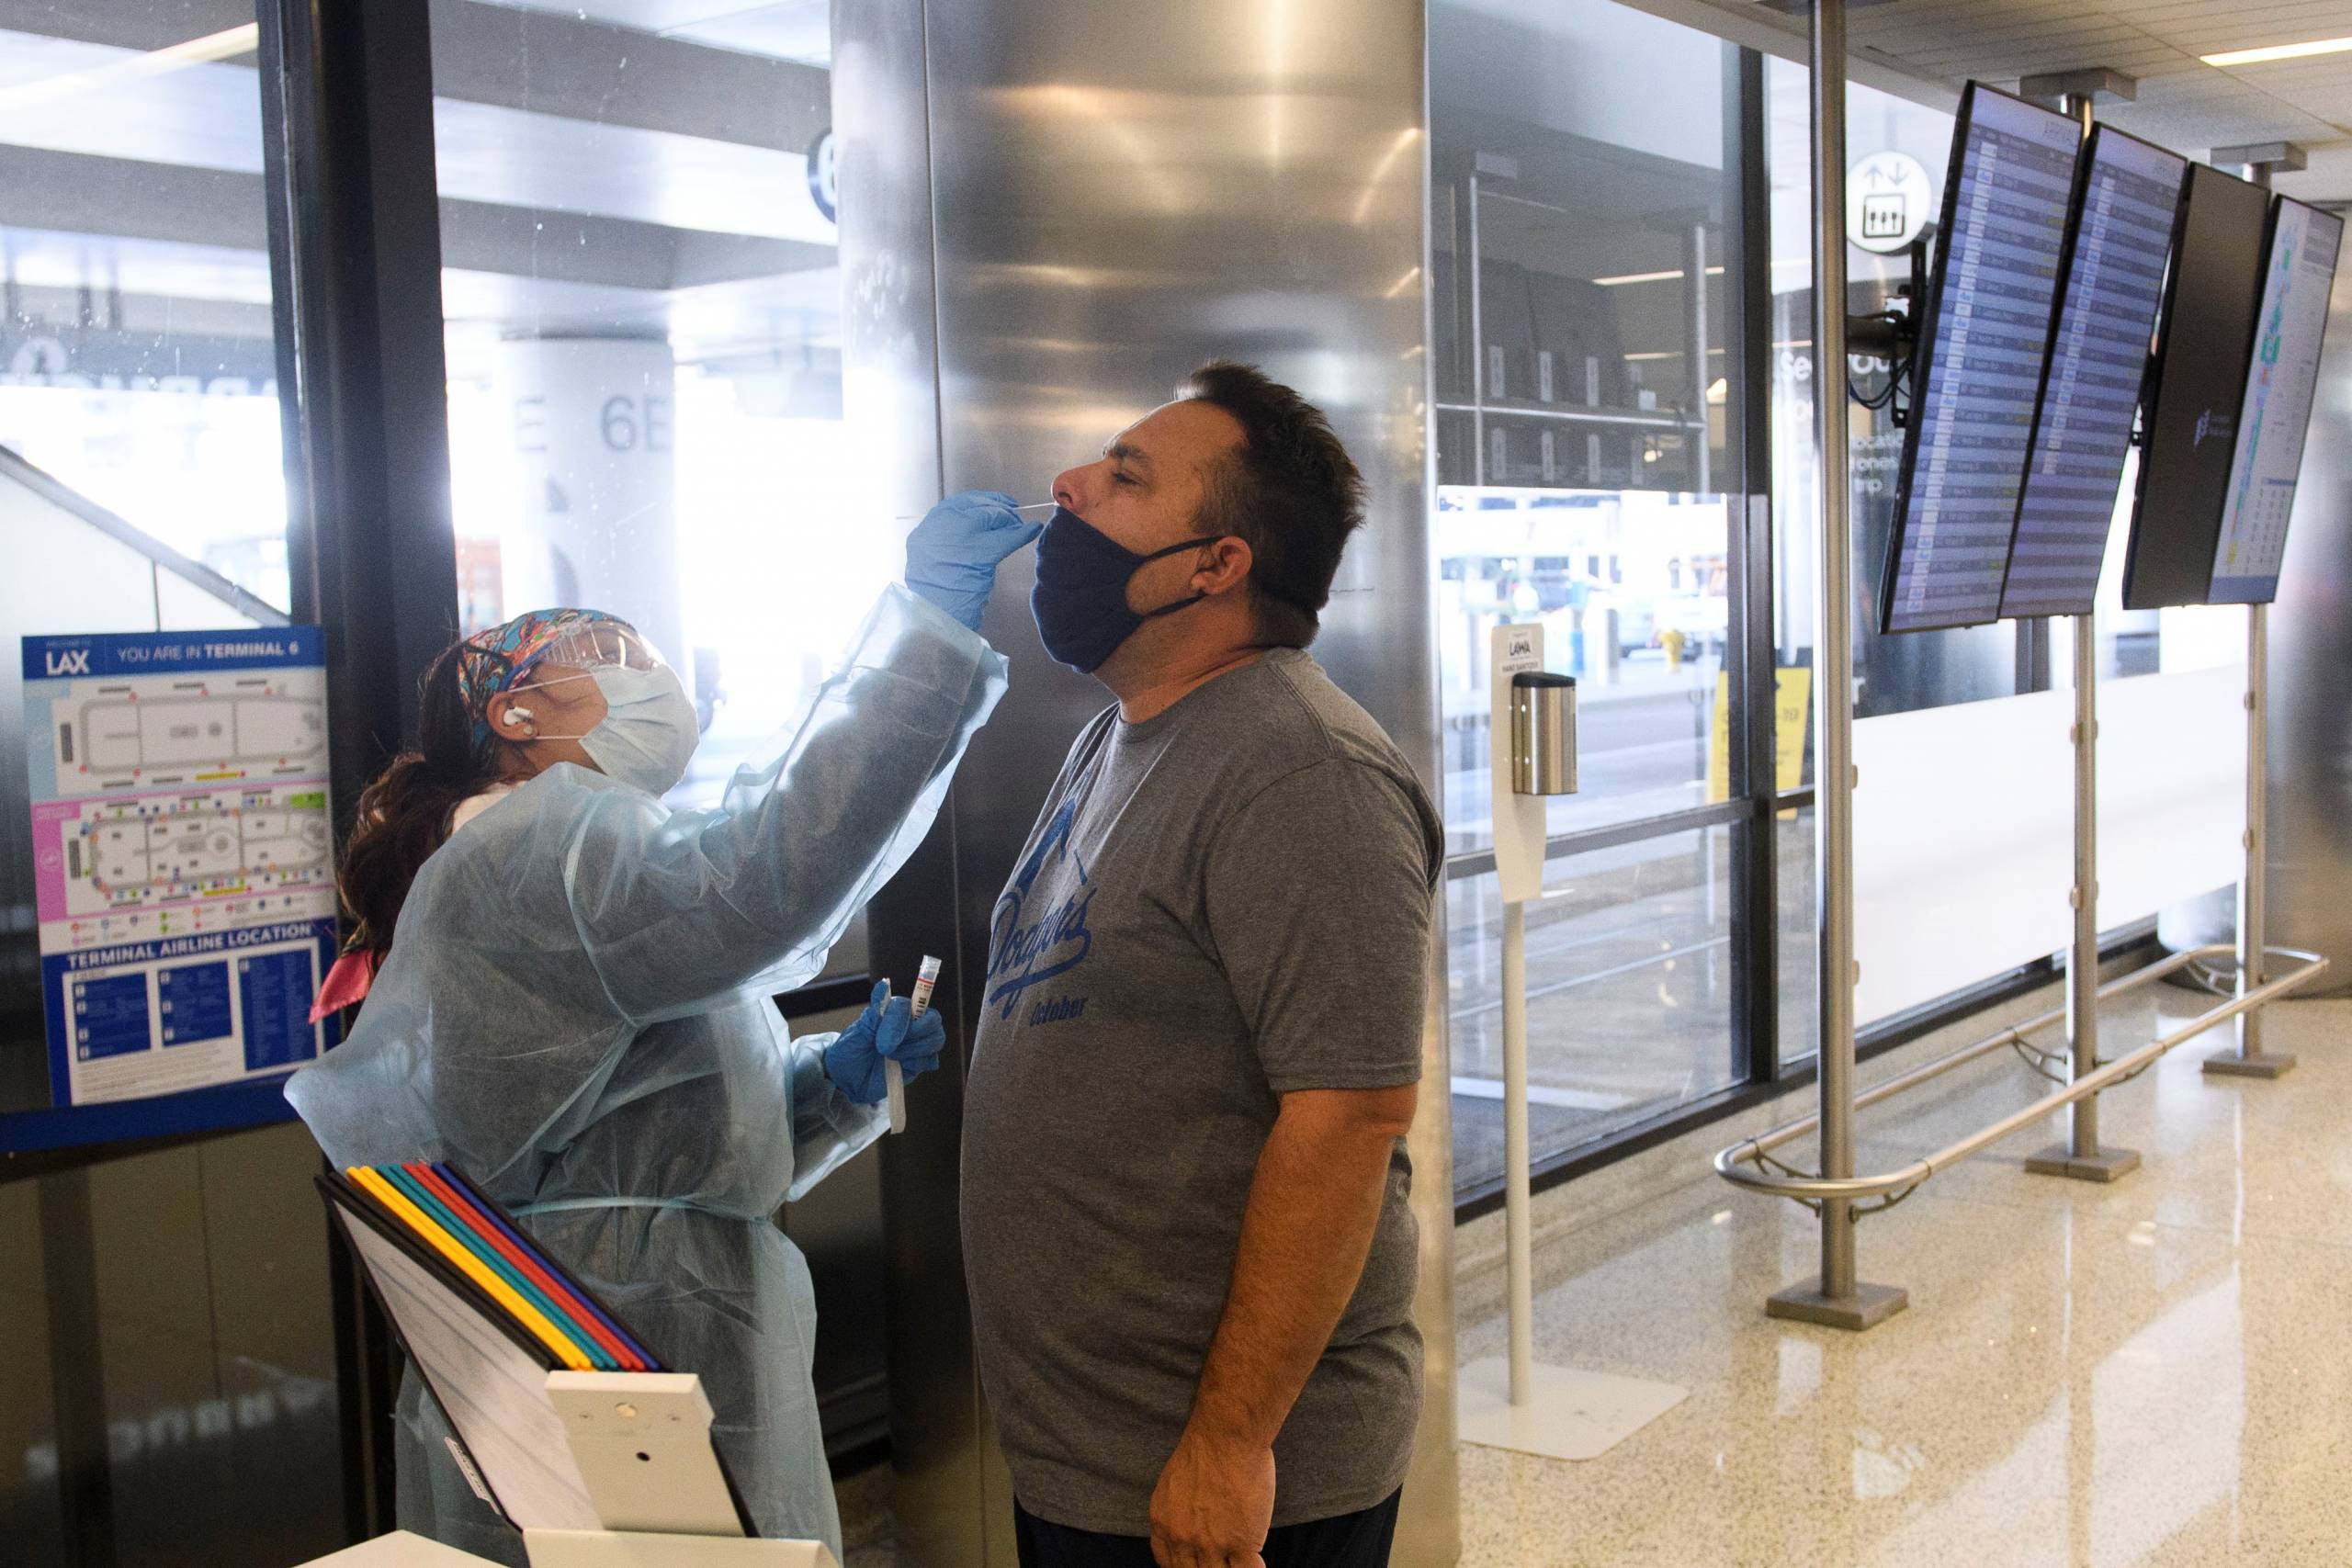 A traveler receives an in-airport Covid-19 nasal swab test a day before his flight to Hawaii at Los Angeles International Airport (LAX) in Los Angeles on Nov. 18, 2020.